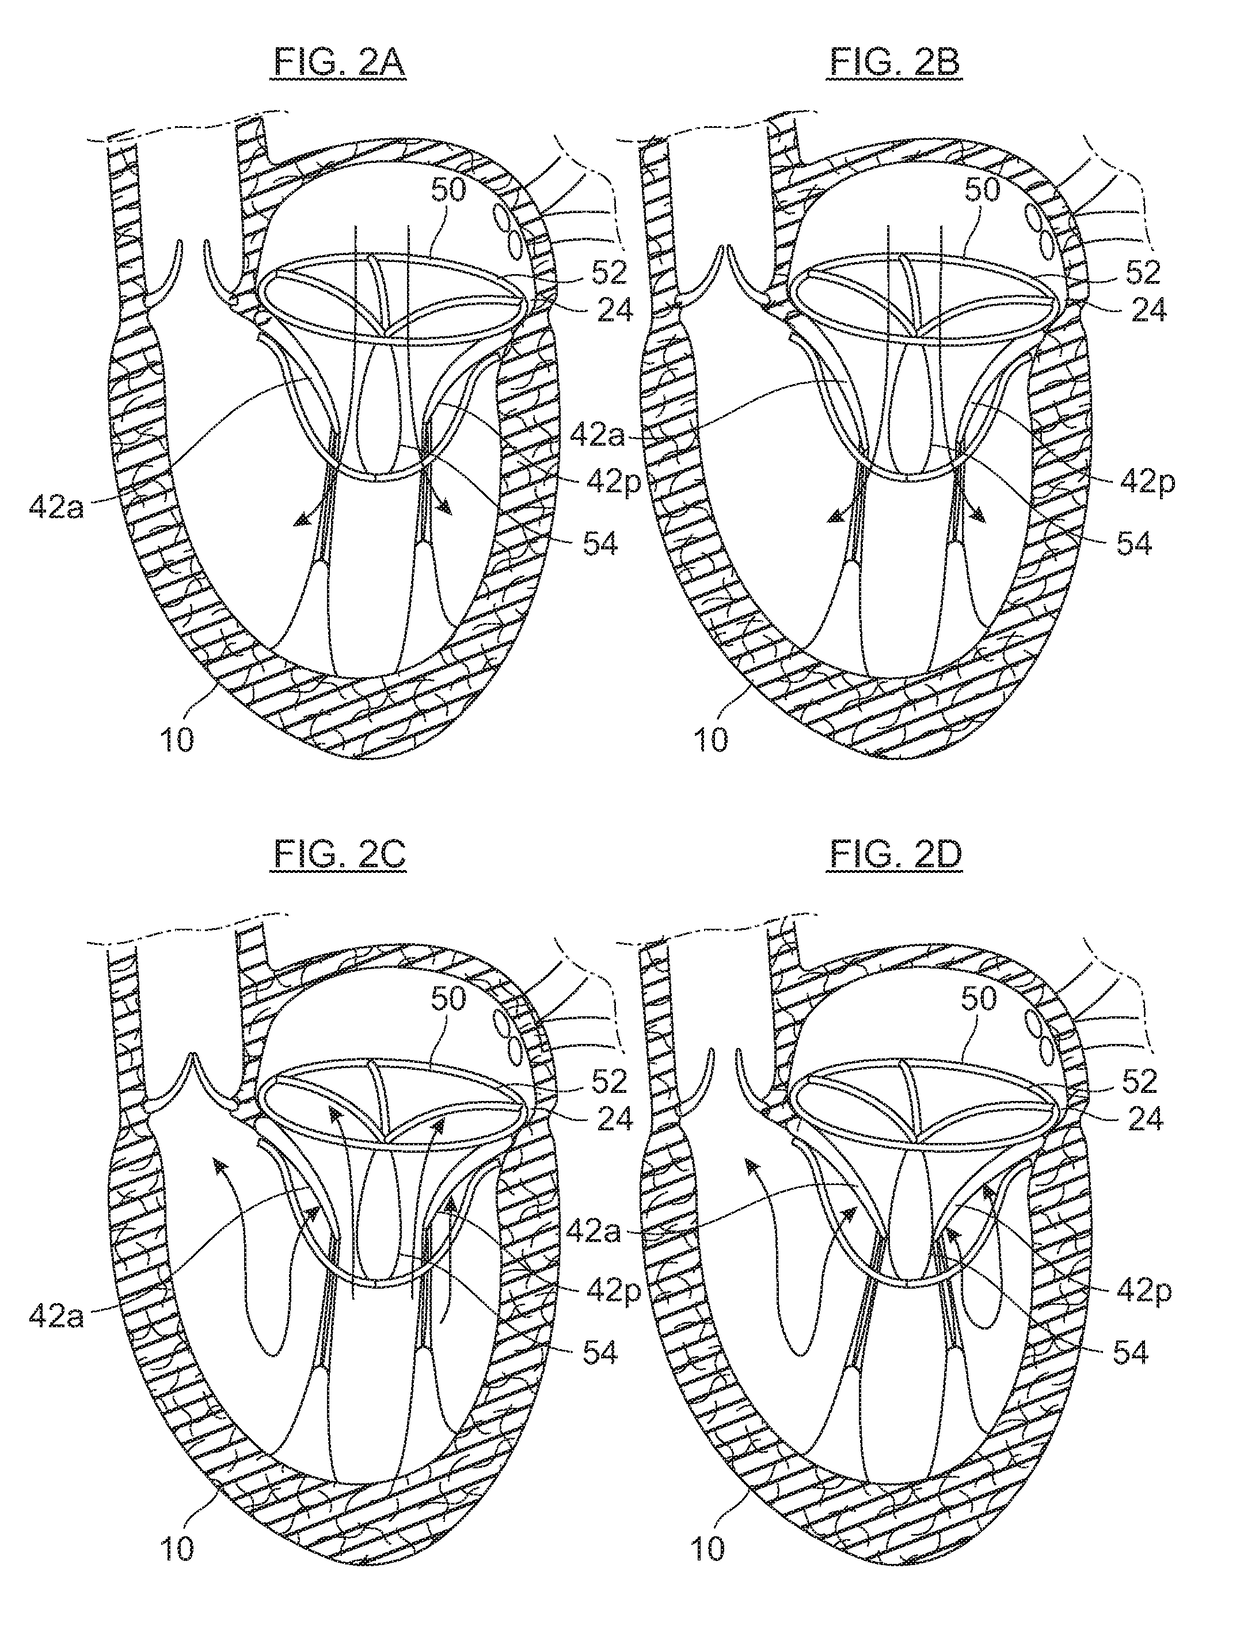 Axisymmetric adjustable device for treating mitral regurgitation